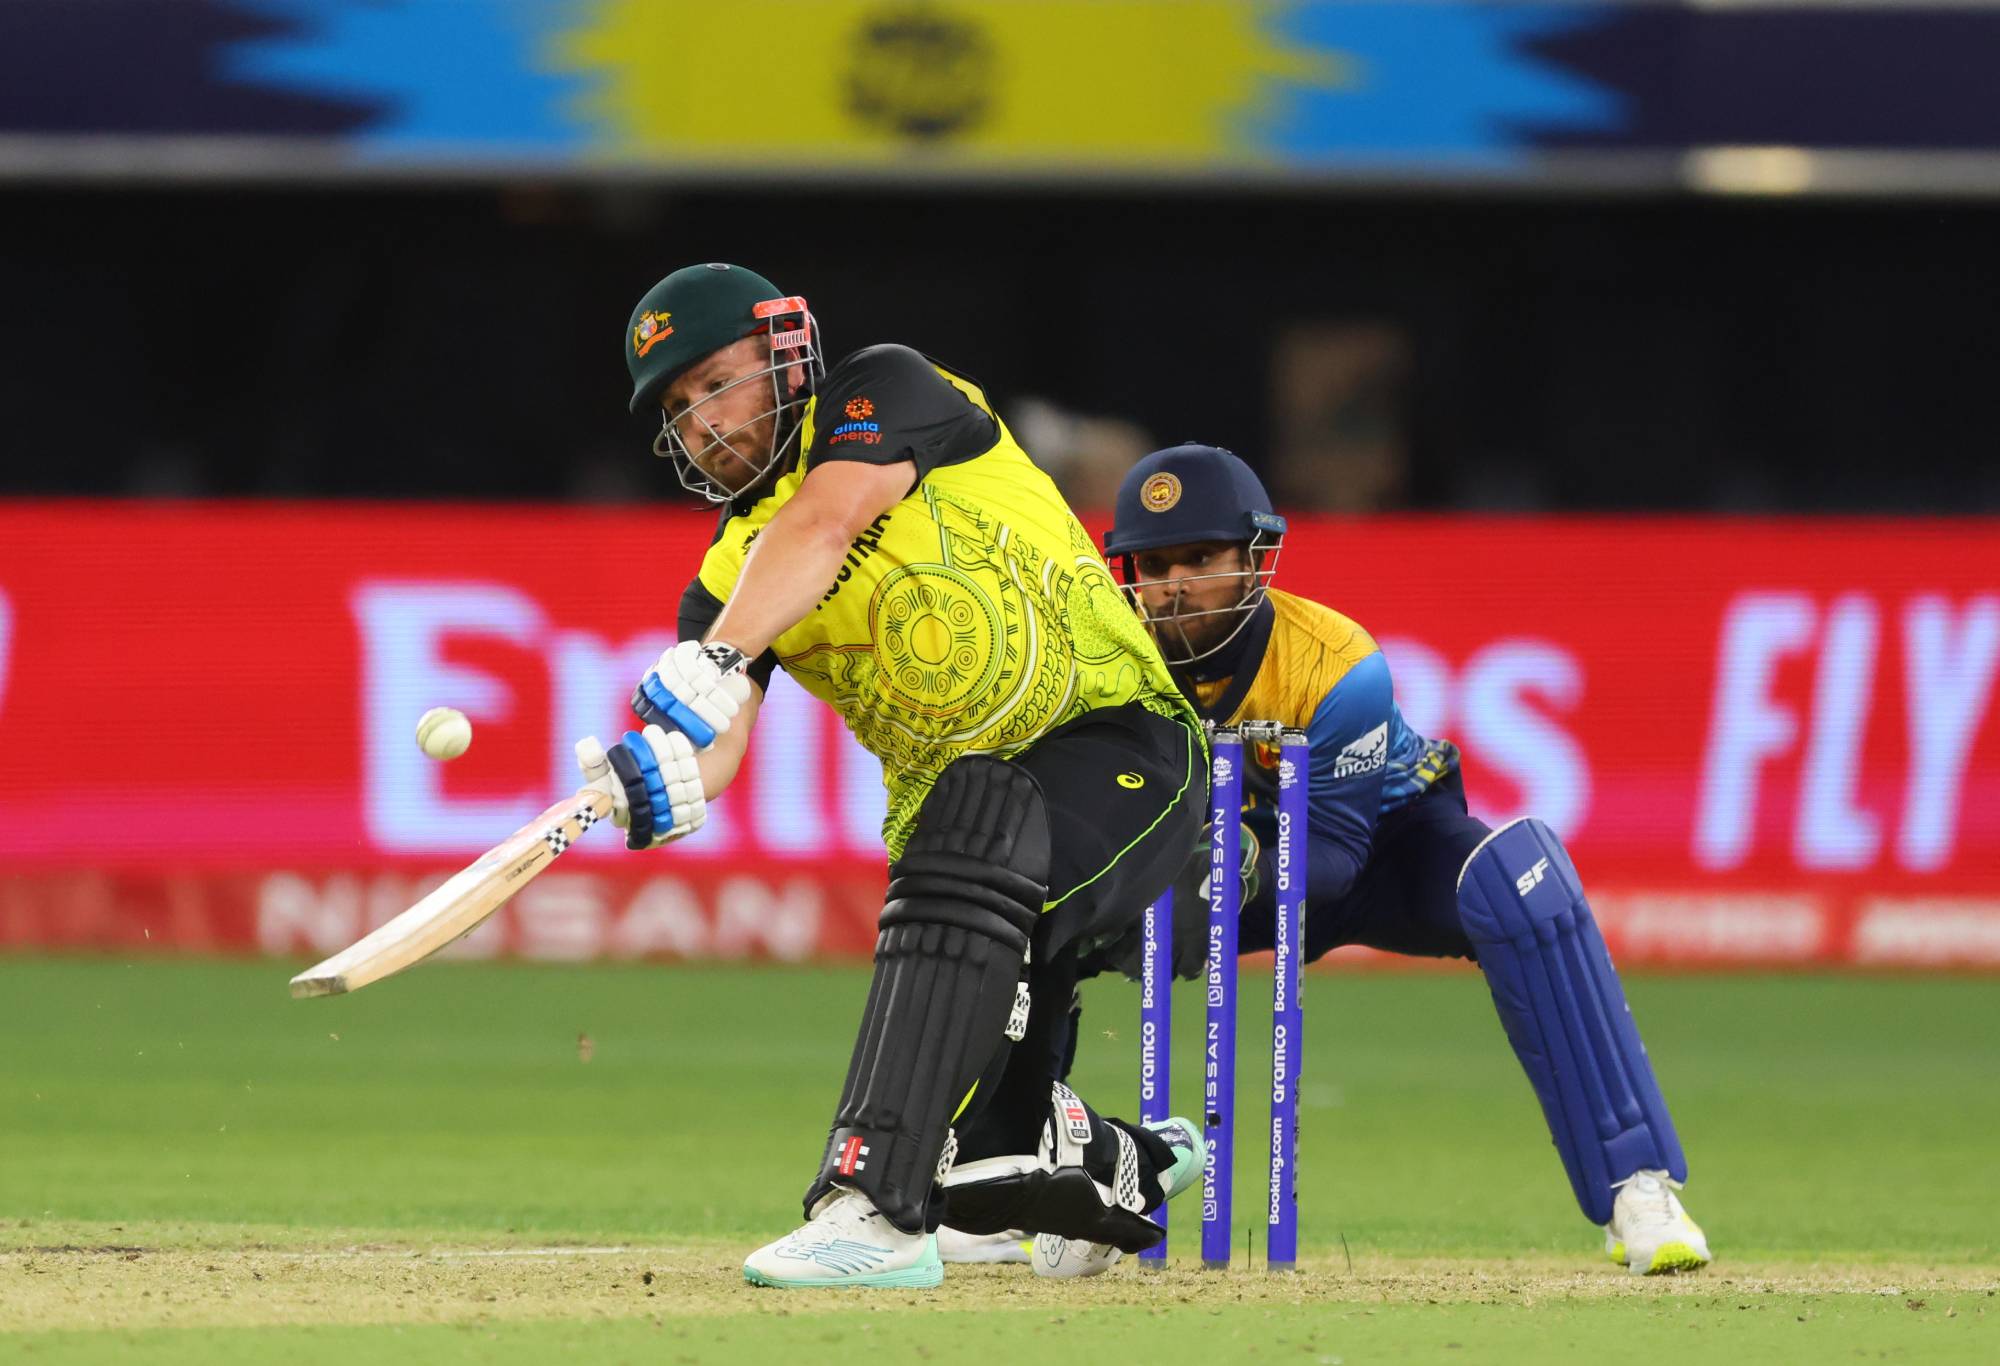 PERTH, AUSTRALIA - OCTOBER 25: Aaron Finch of Australia plays his shot during the ICC Men's T20 World Cup match between Australia and Sri Lanka at Perth Stadium on October 25, 2022 in Perth, Australia. (Photo by James Worsfold/Getty Images)